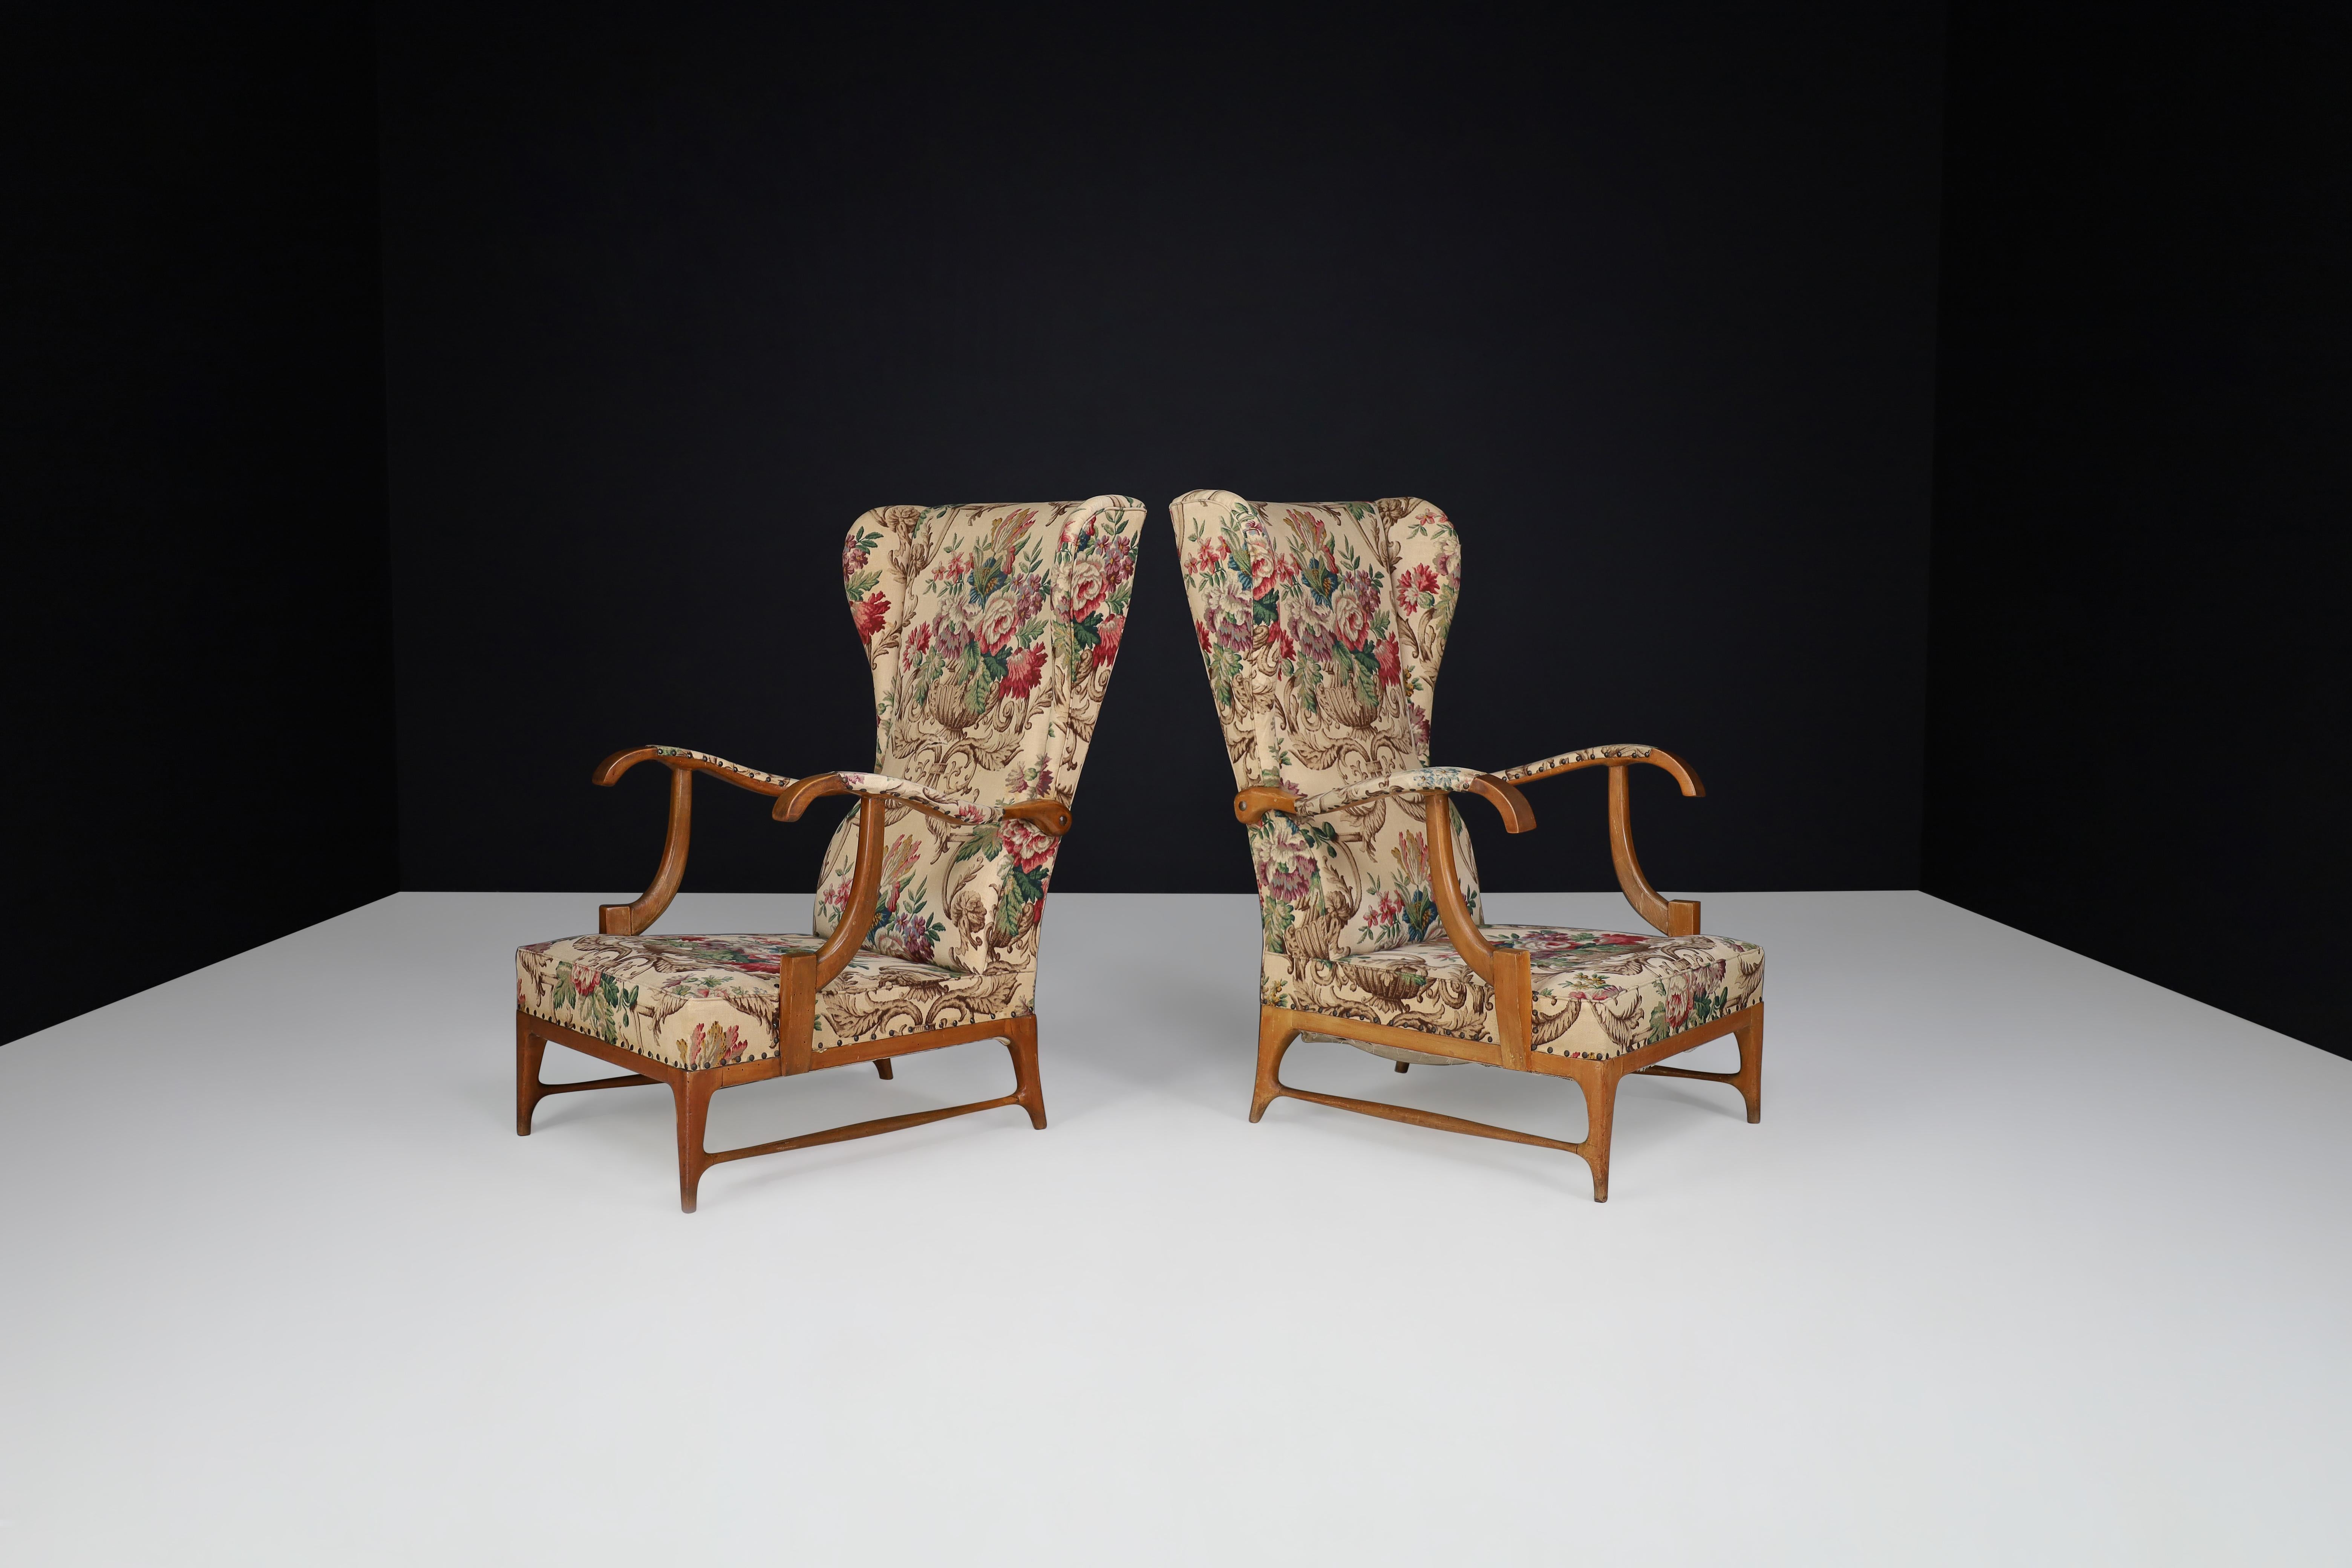 Mid-Century Modern Paolo Buffa High-Back Armchairs with Floral Upholstery, Italy, 1940s